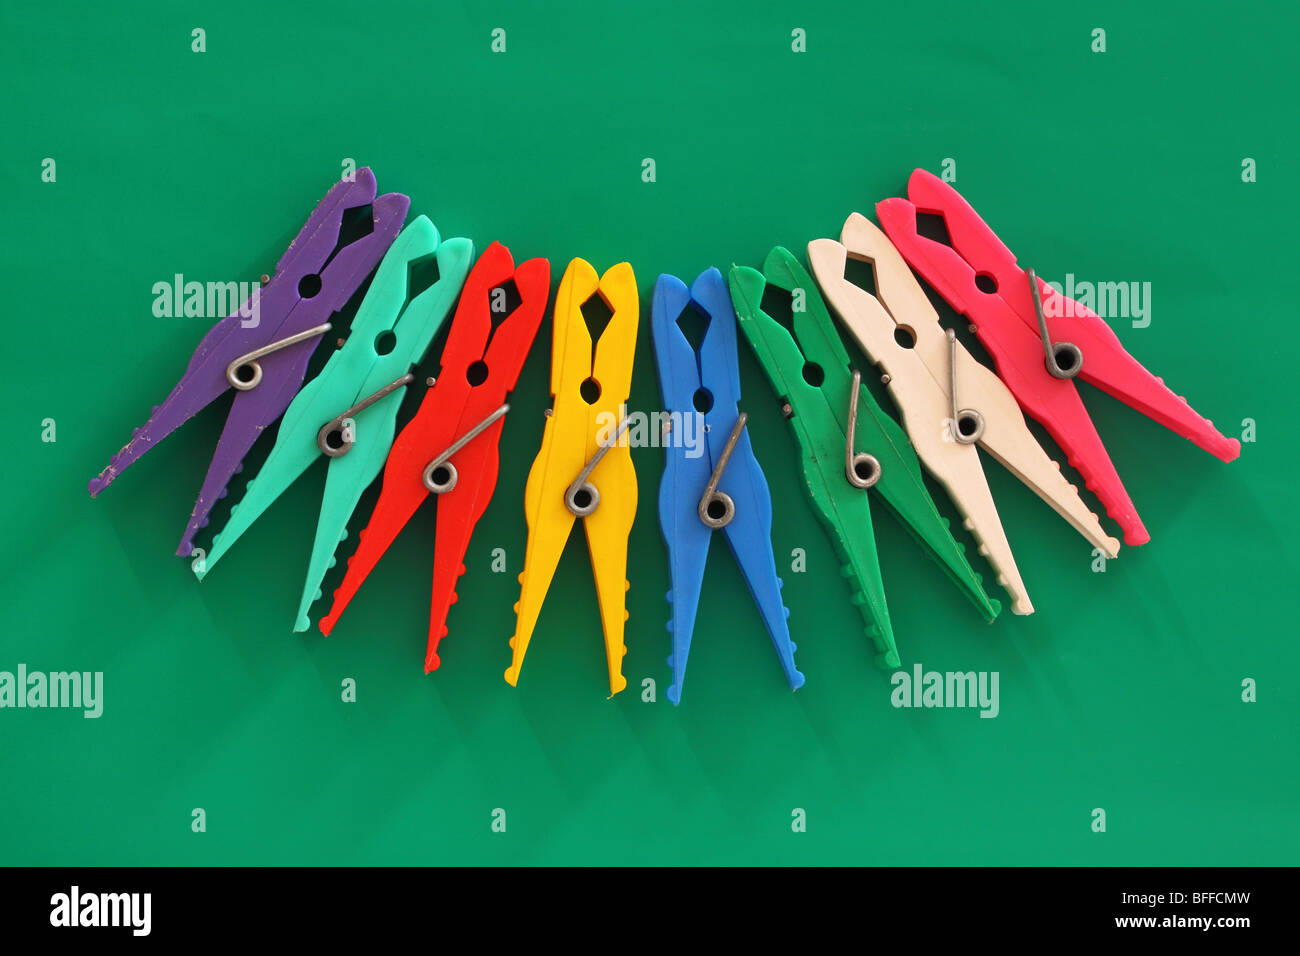 Multicolor laundry clips on green background Stock Photo